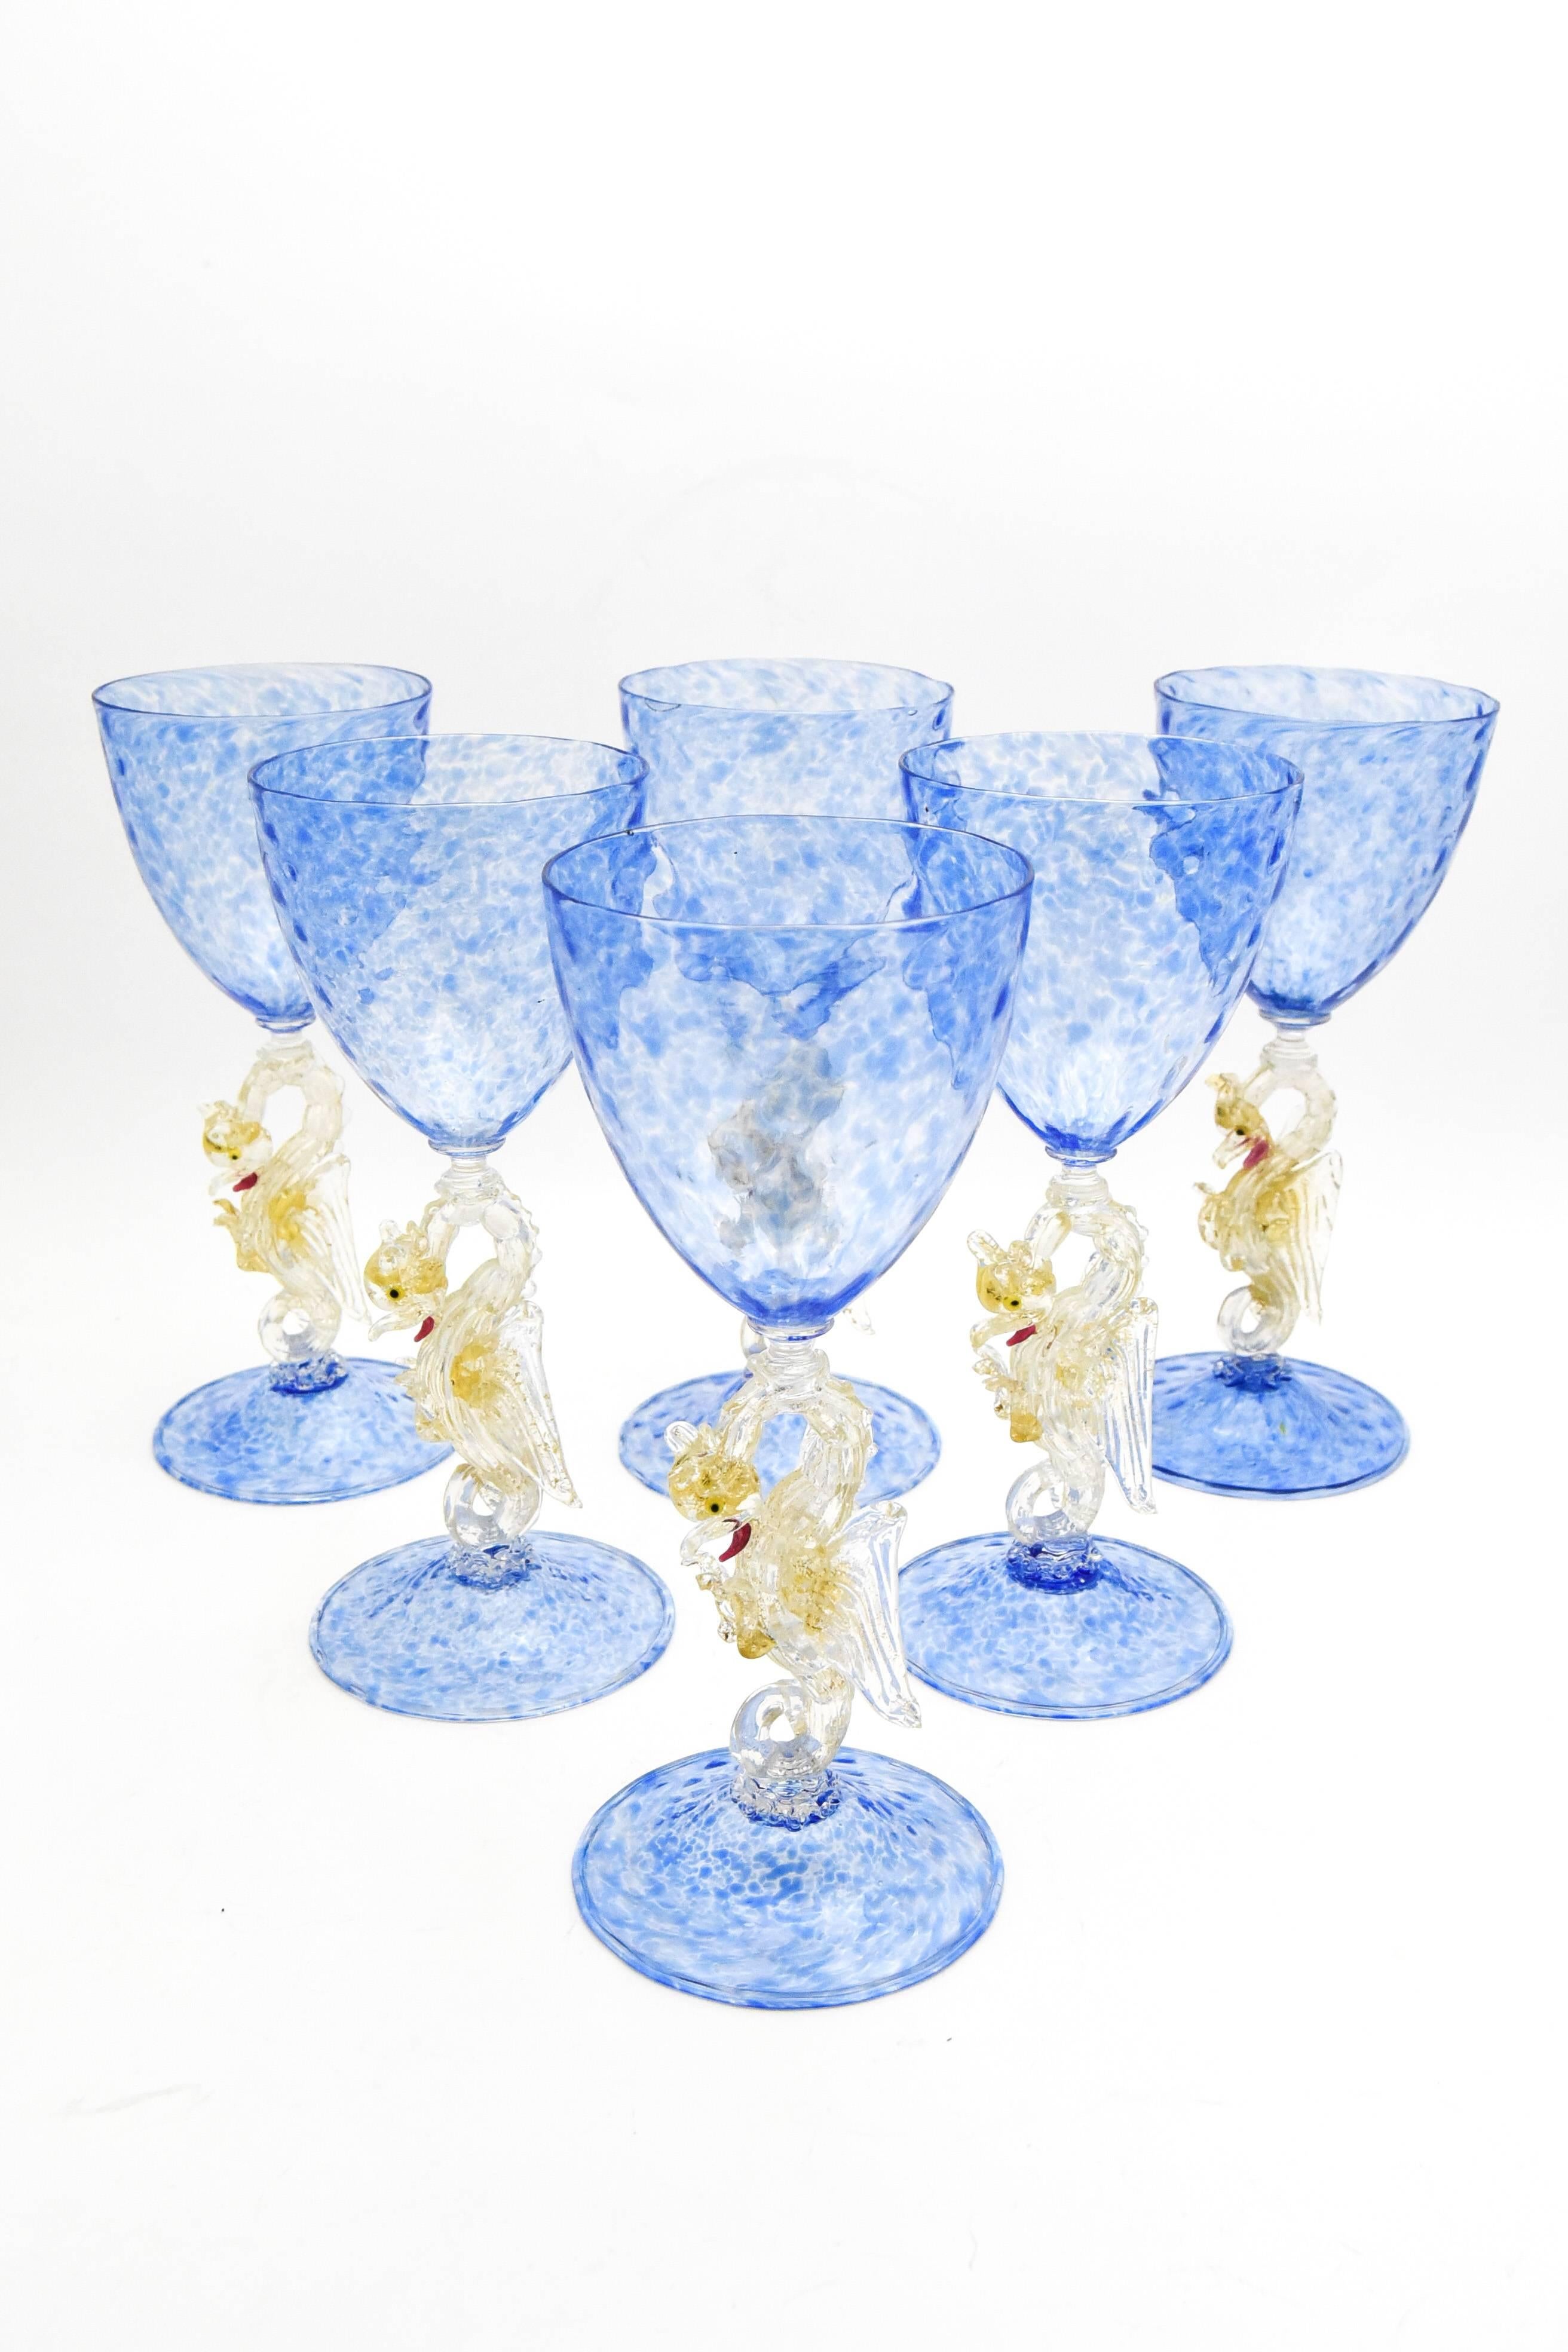 This an amazing set of eight tall, hand blown quilted optic ribbed French blue water goblets or chalices. Six goblets are pictured but there are 8 in the set. The clear connectors separate the blue bowl and foot, each a body in motion. The full